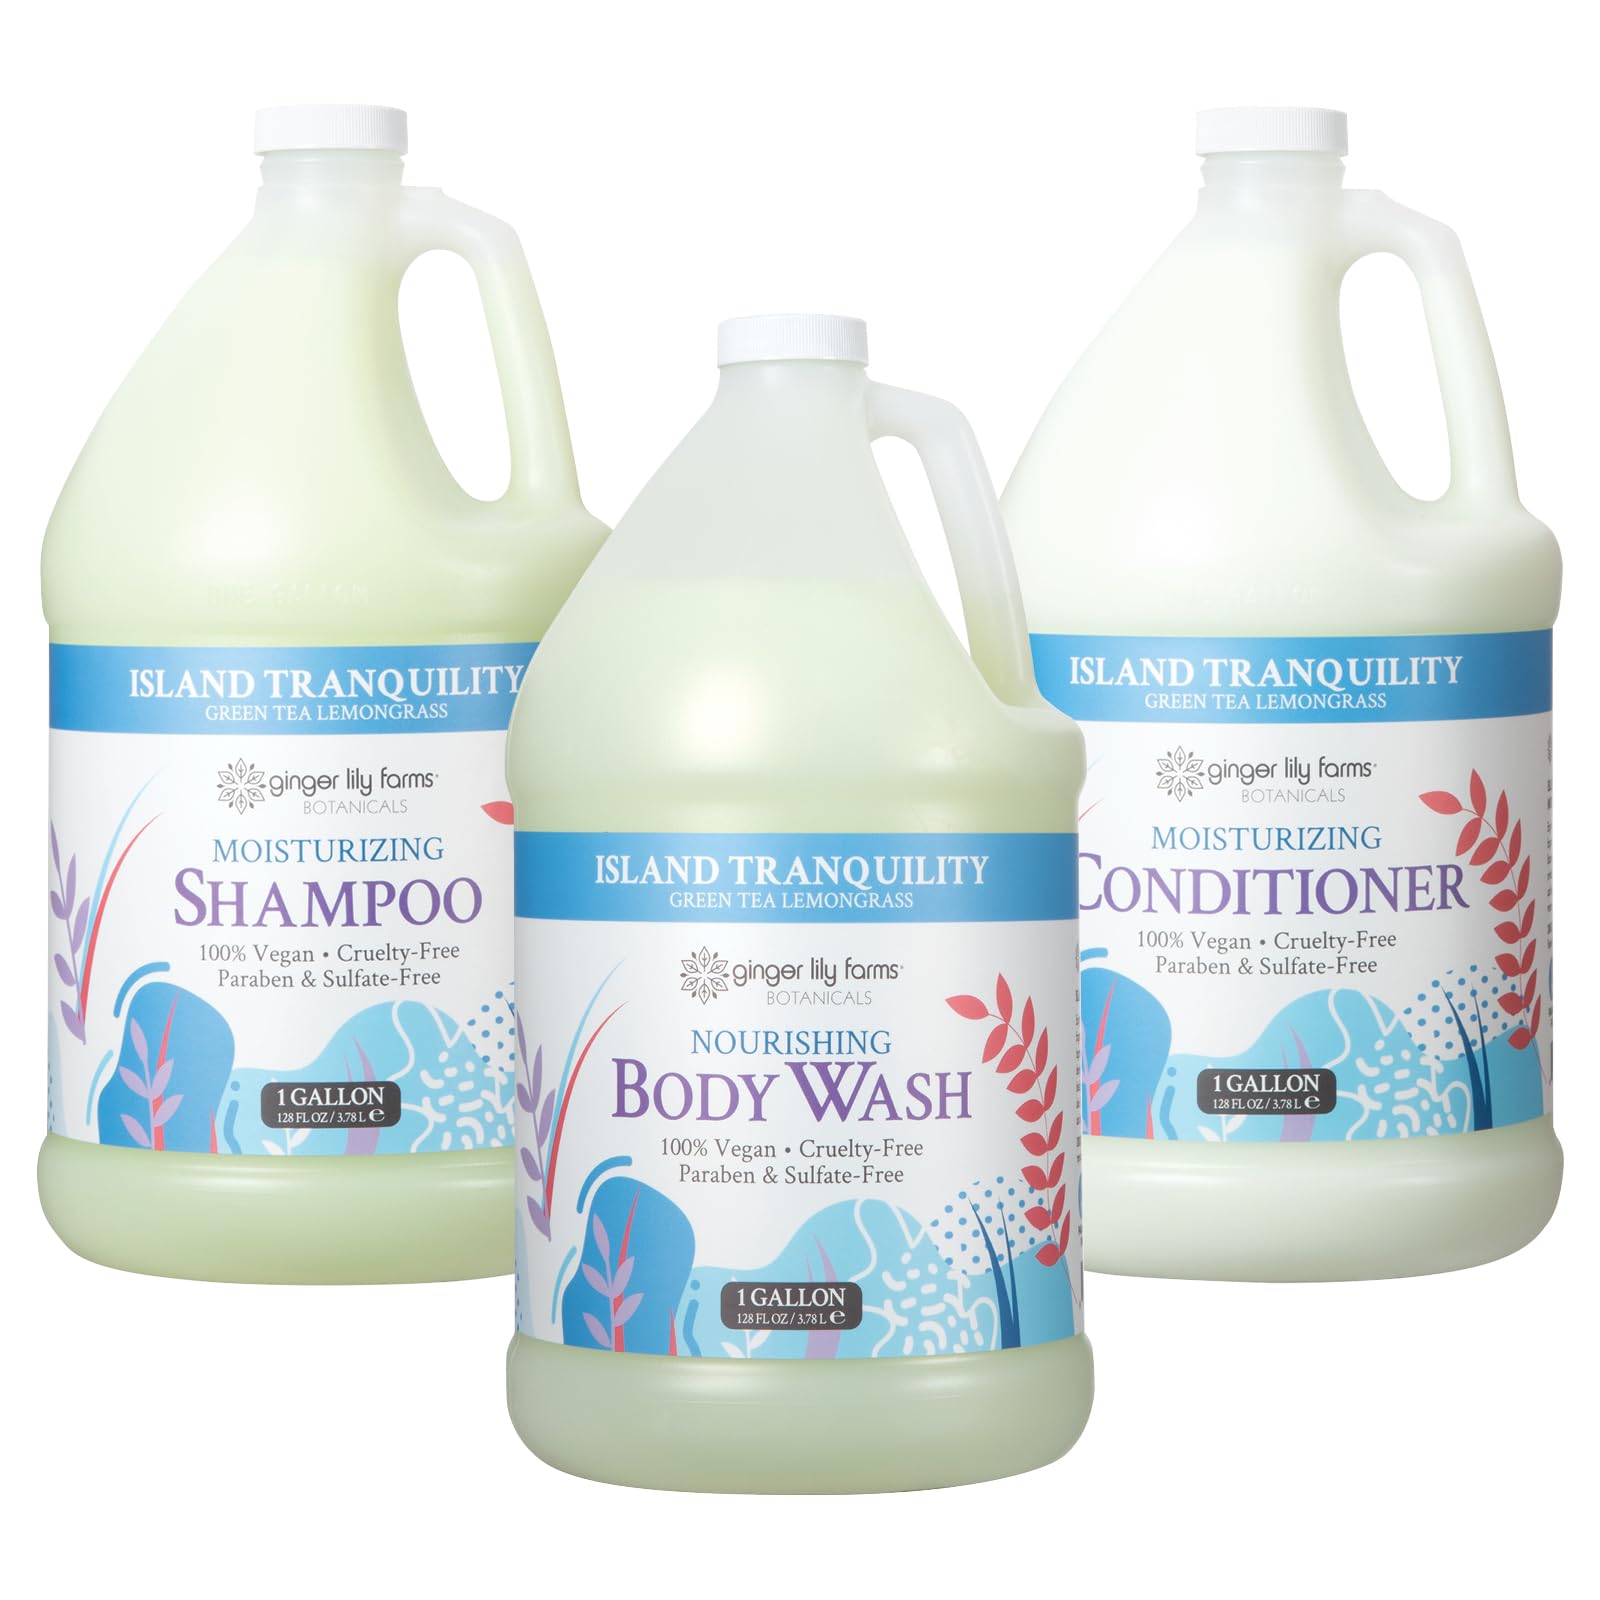 Ginger Lily Farms Botanicals Shampoo + Conditioner + Body Wash Bundle, Island Tranquility, 1 Gallon Each